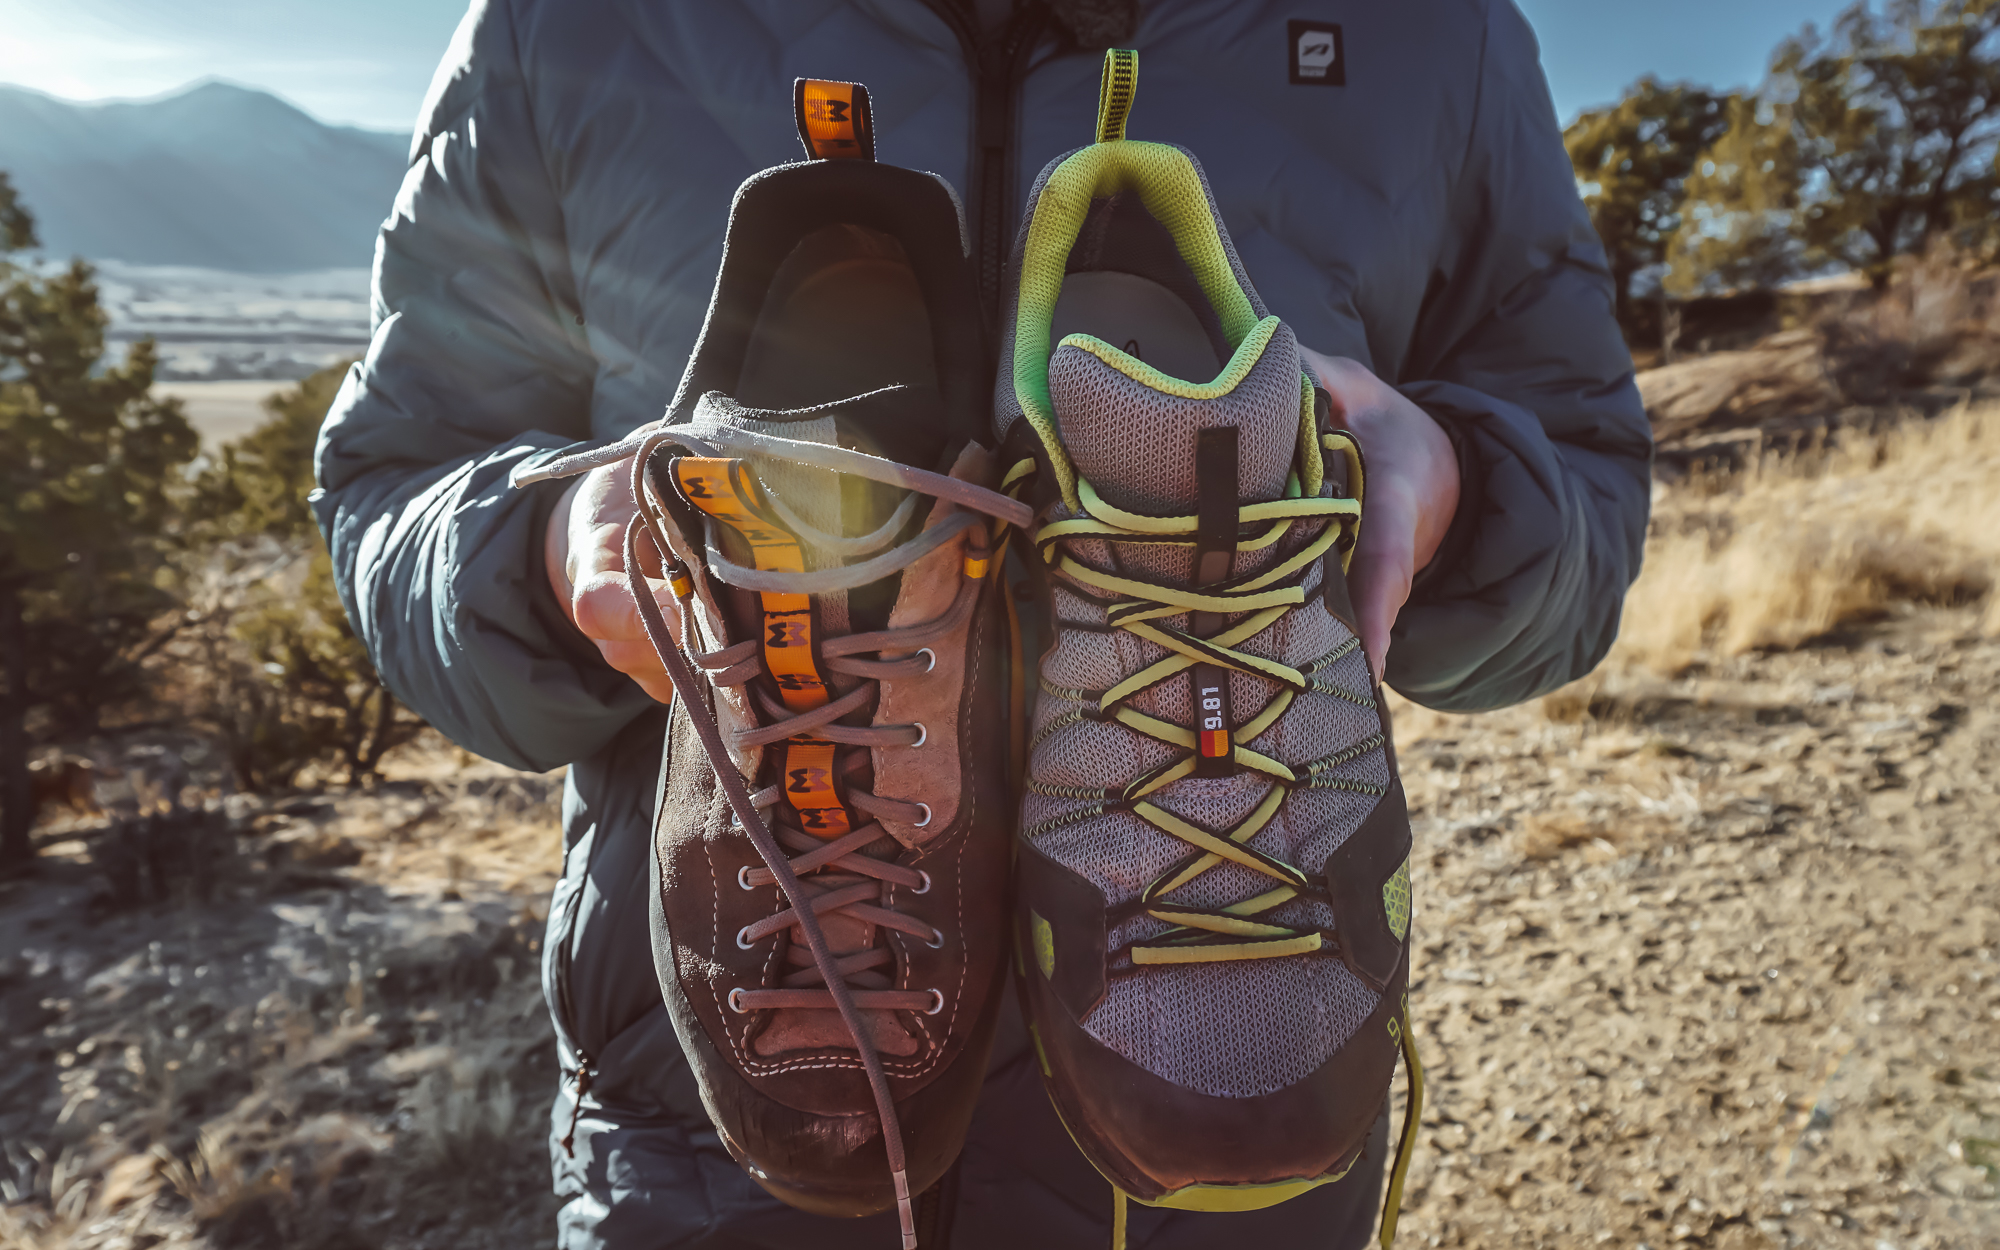 [Review] Men’s 9.81 Trail Pro III GTX by Garmont – Adventure Rig